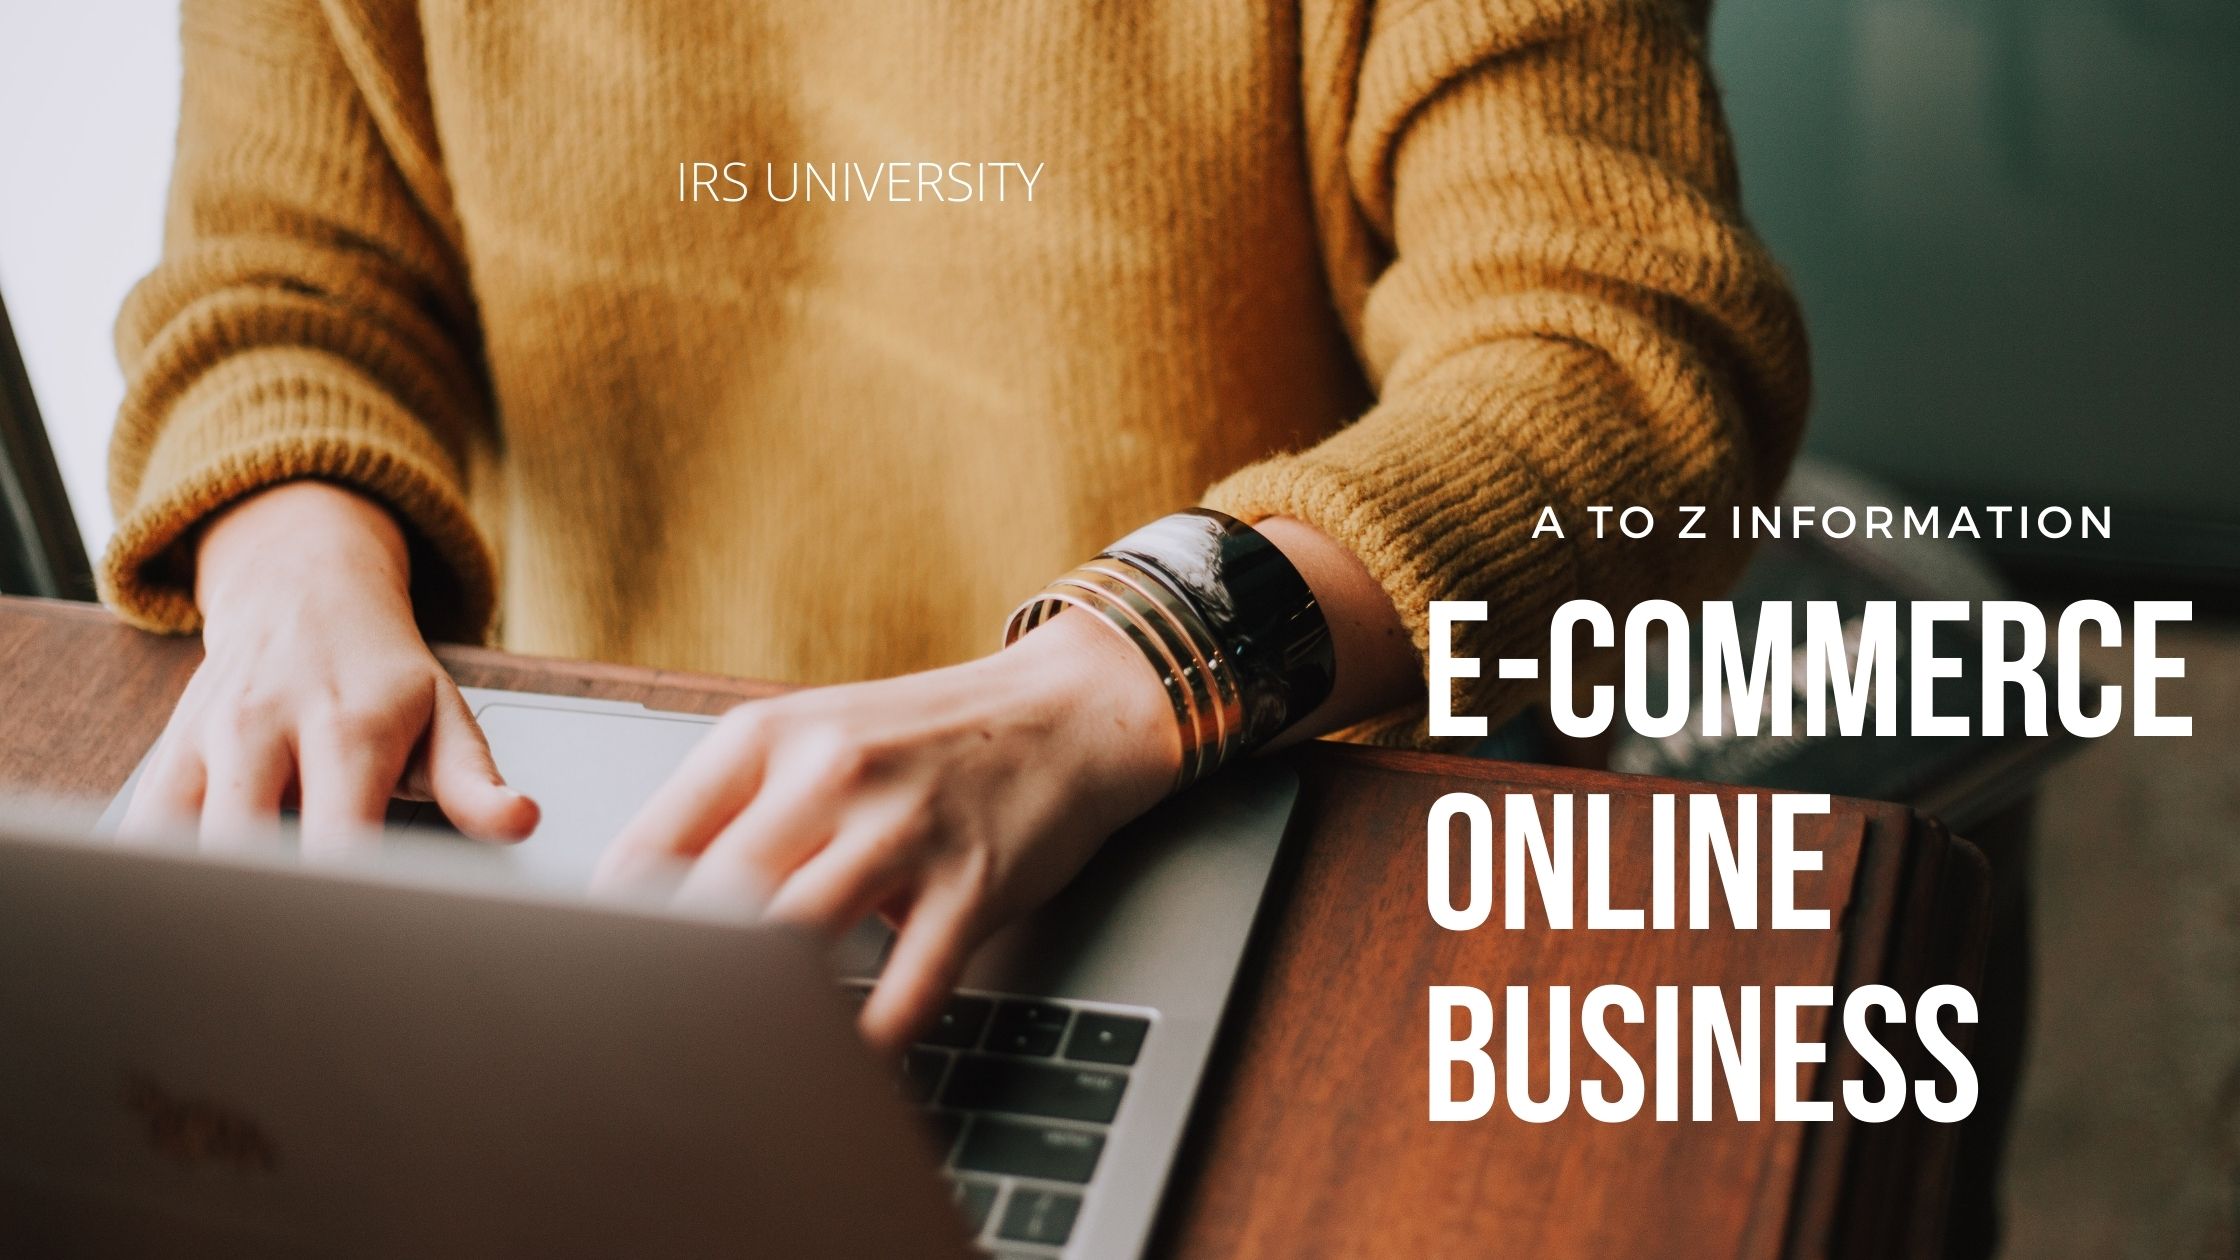 ECOMMERCE online business